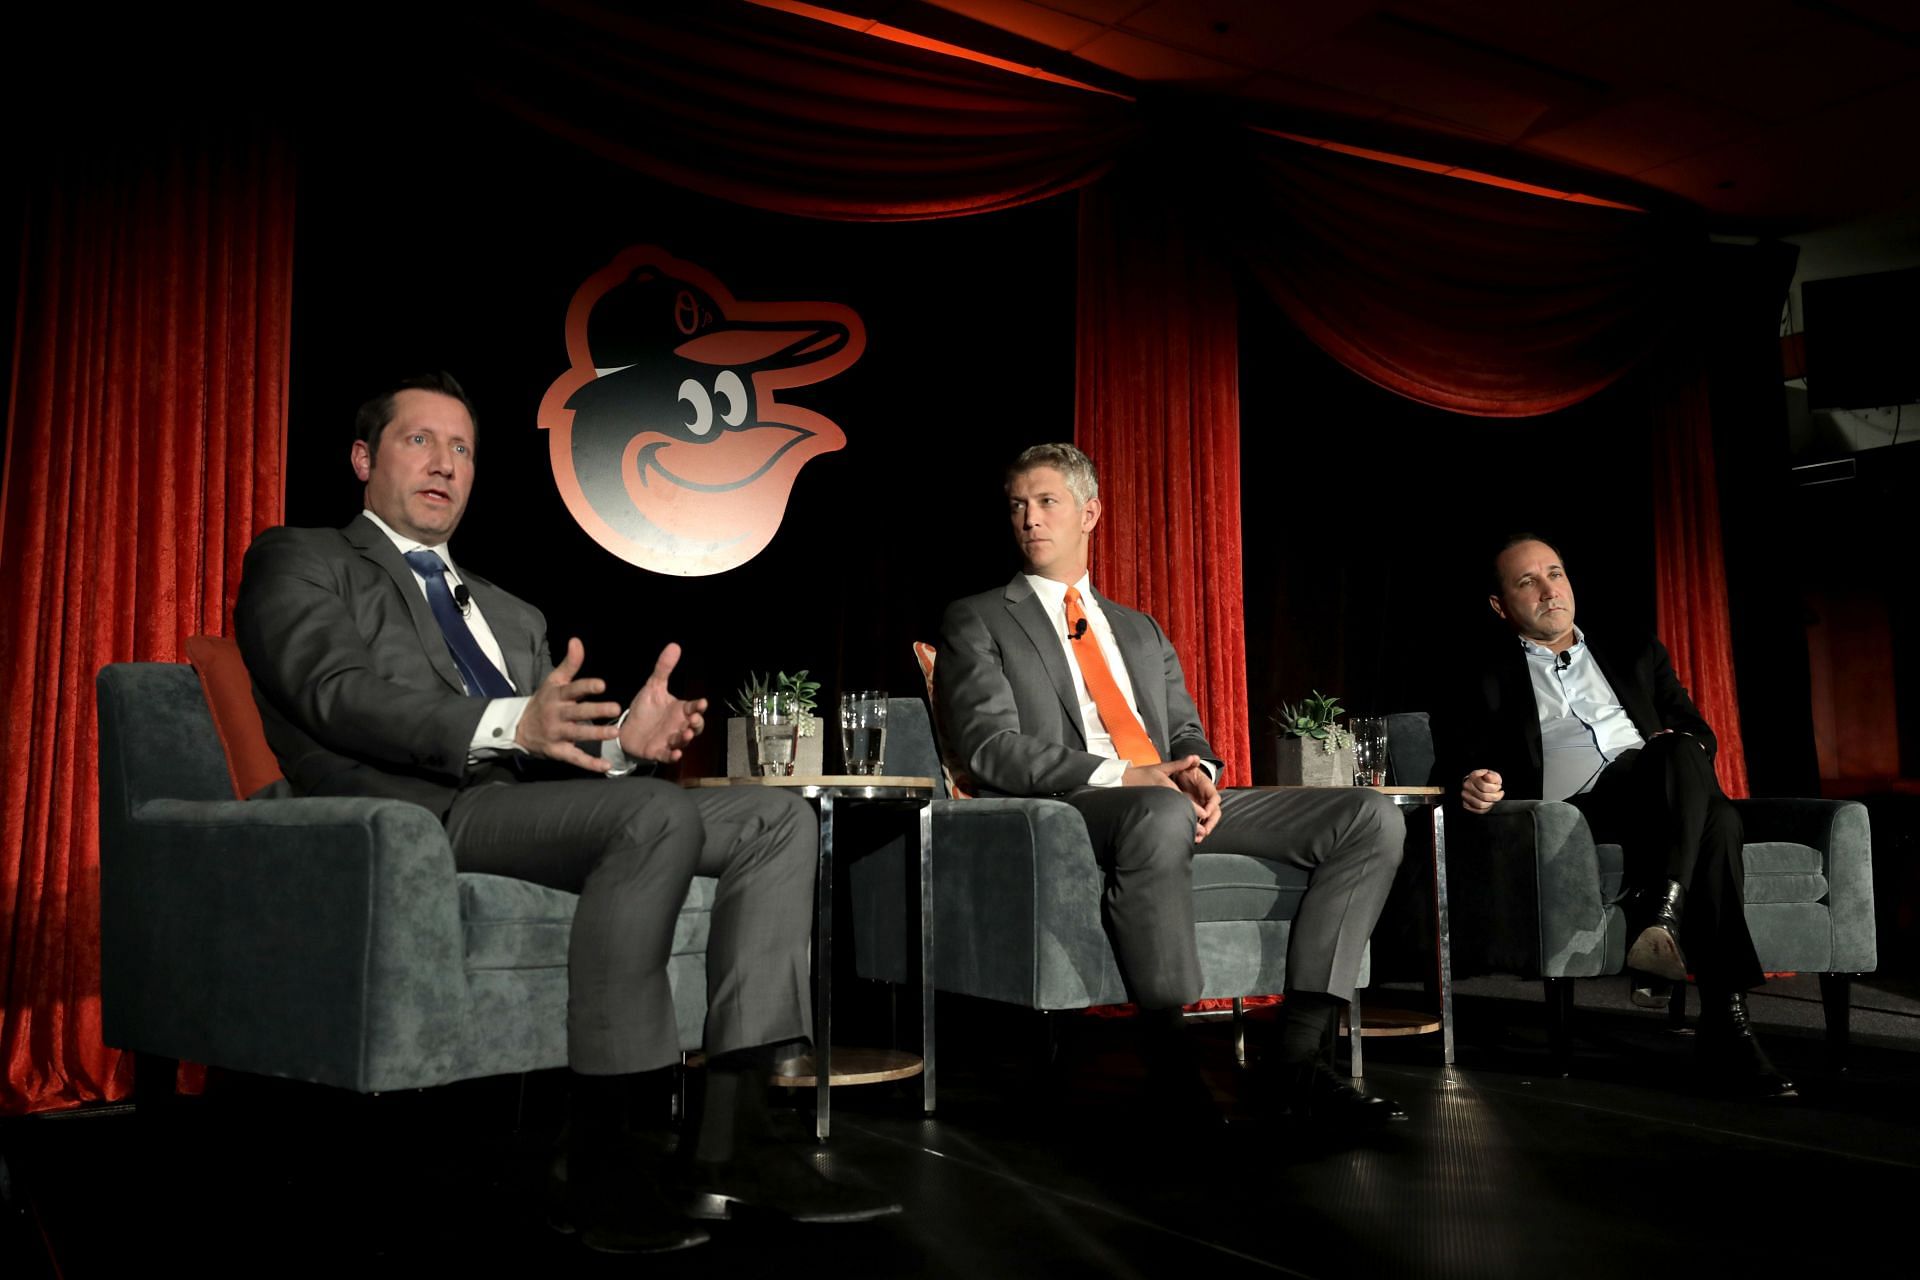 Baltimore Orioles Introduce Mike Elias - News Conference (via Getty Images)